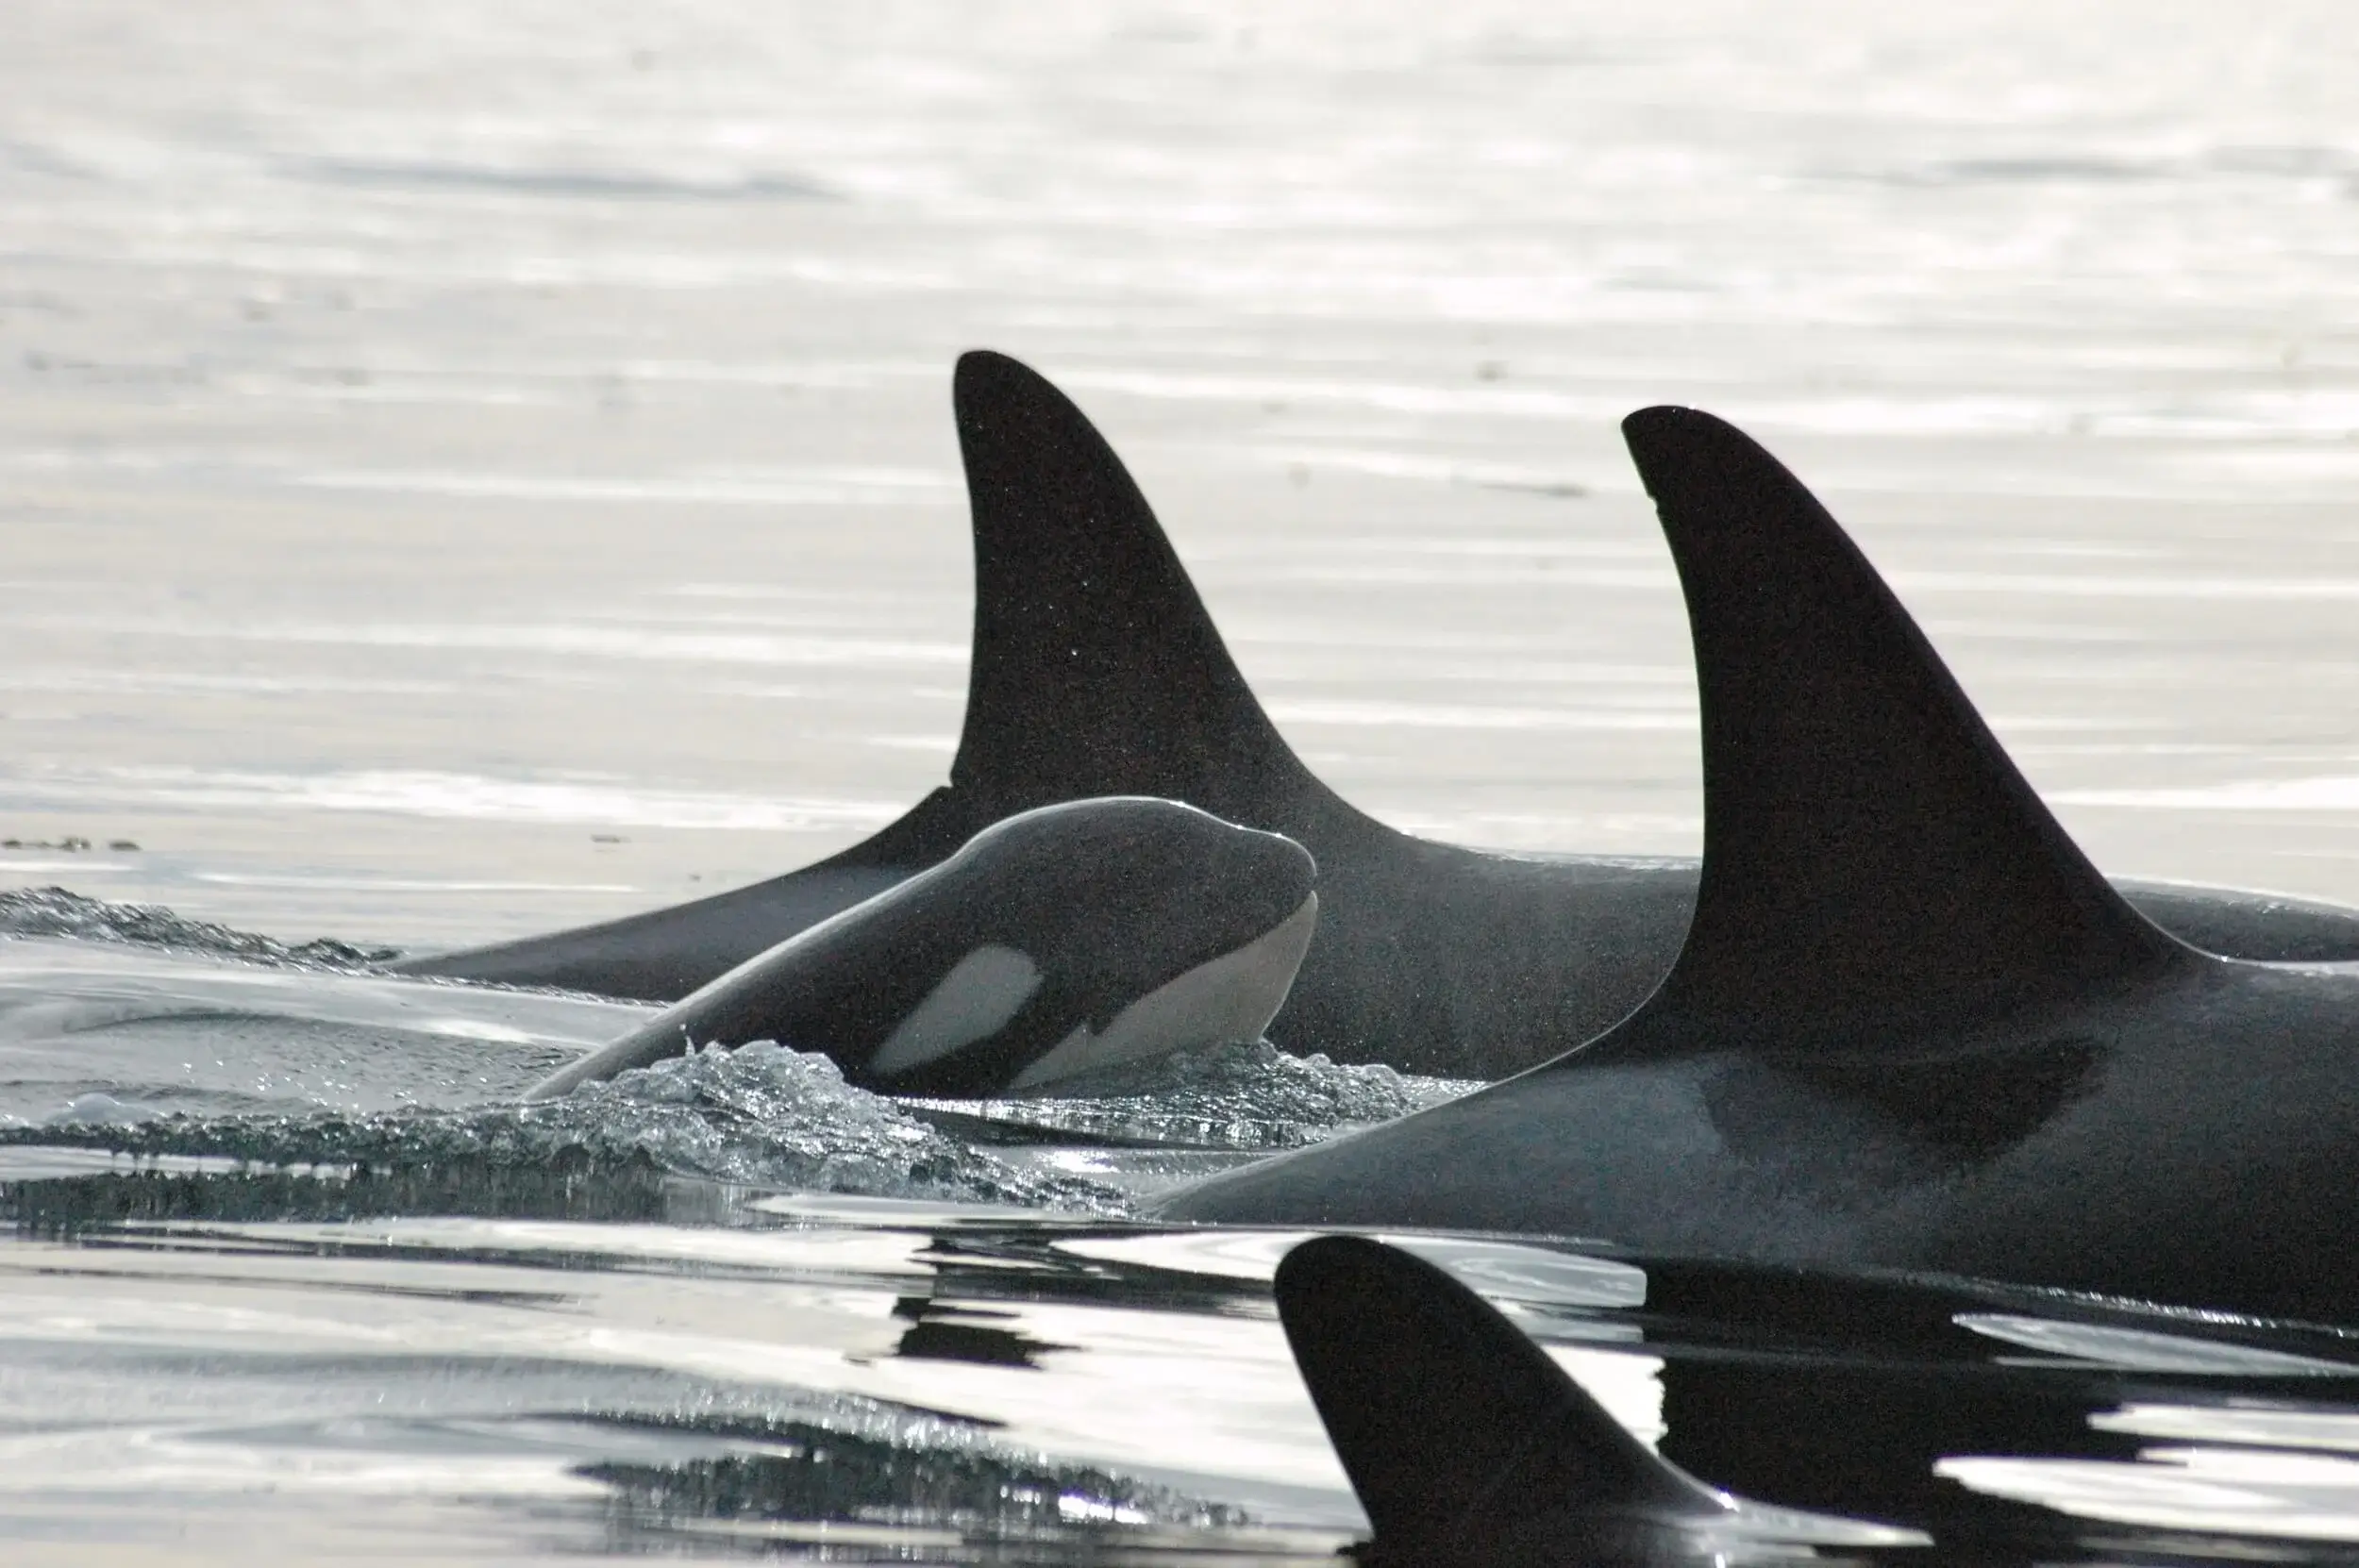 A killer whale calf in Washington State, Movie Locations in the Pacific Northwest